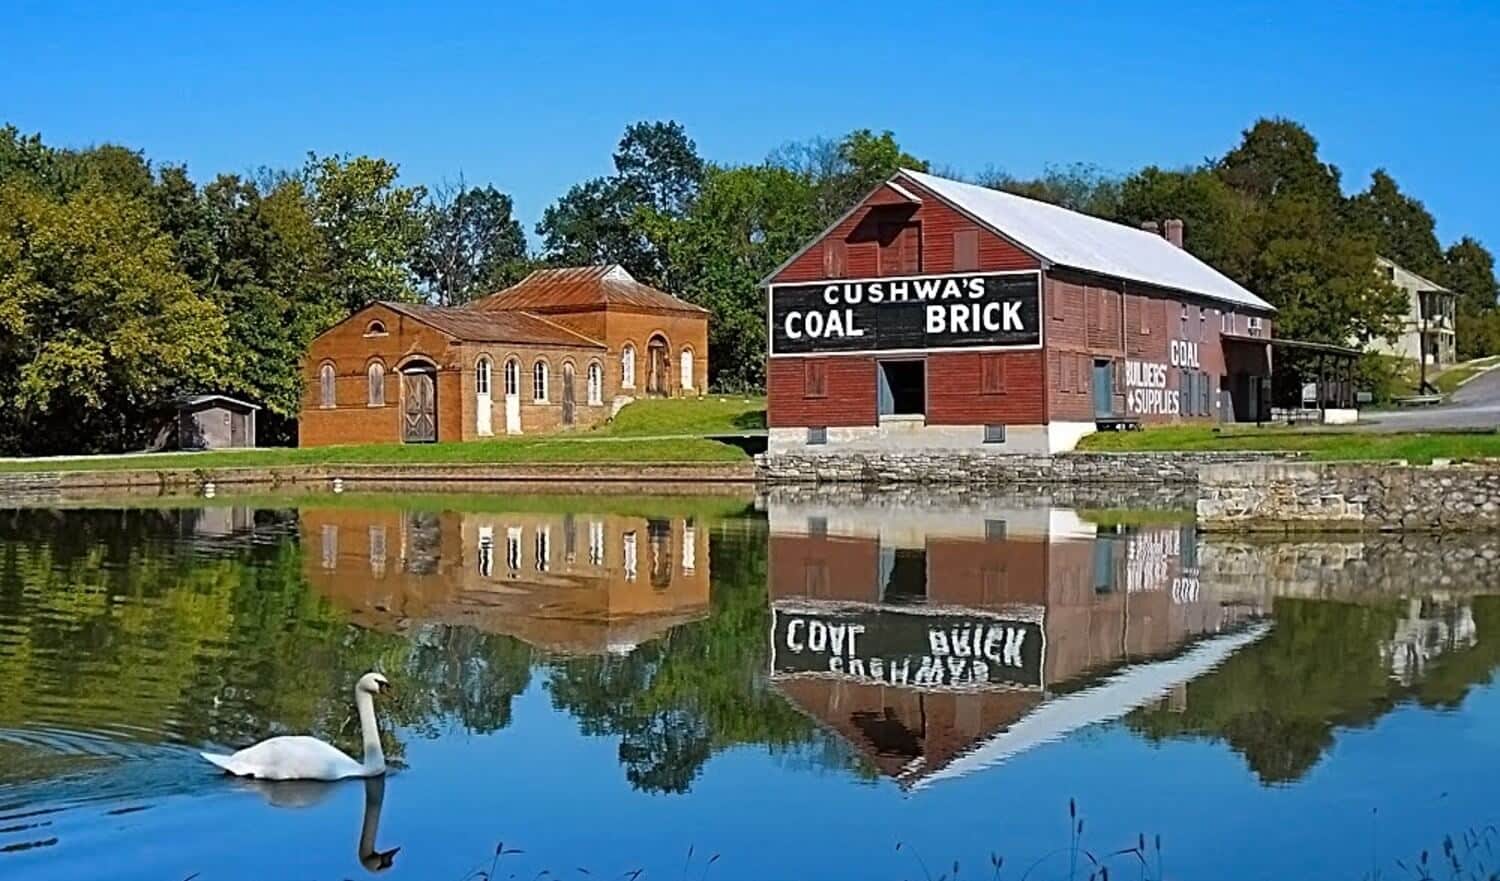 	Two old buildings sitting near a pond of water with one white swan swimming